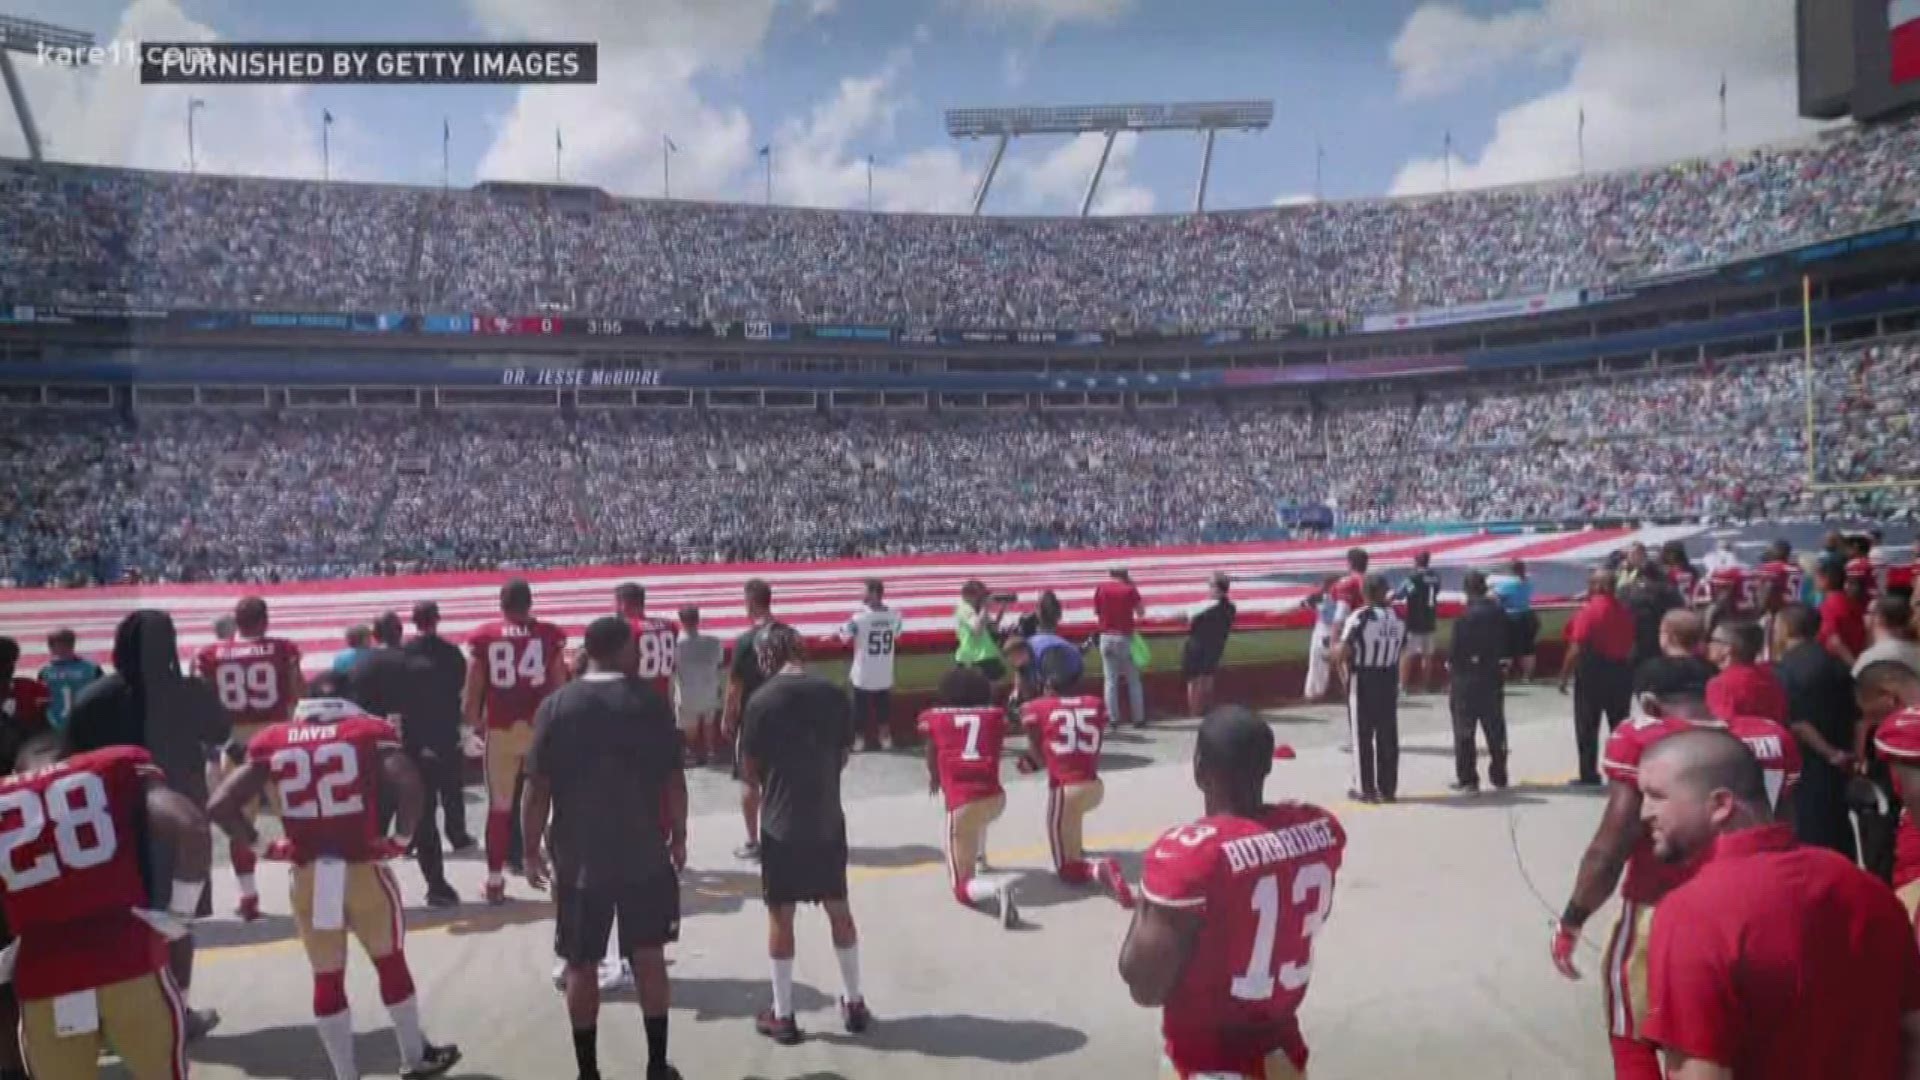 NFL owners have approved a new policy aimed at addressing the firestorm over national anthem protests, permitting players to stay in the locker room during the "The Star-Spangled Banner" but requiring them to stand if they come to the field. https://kare1